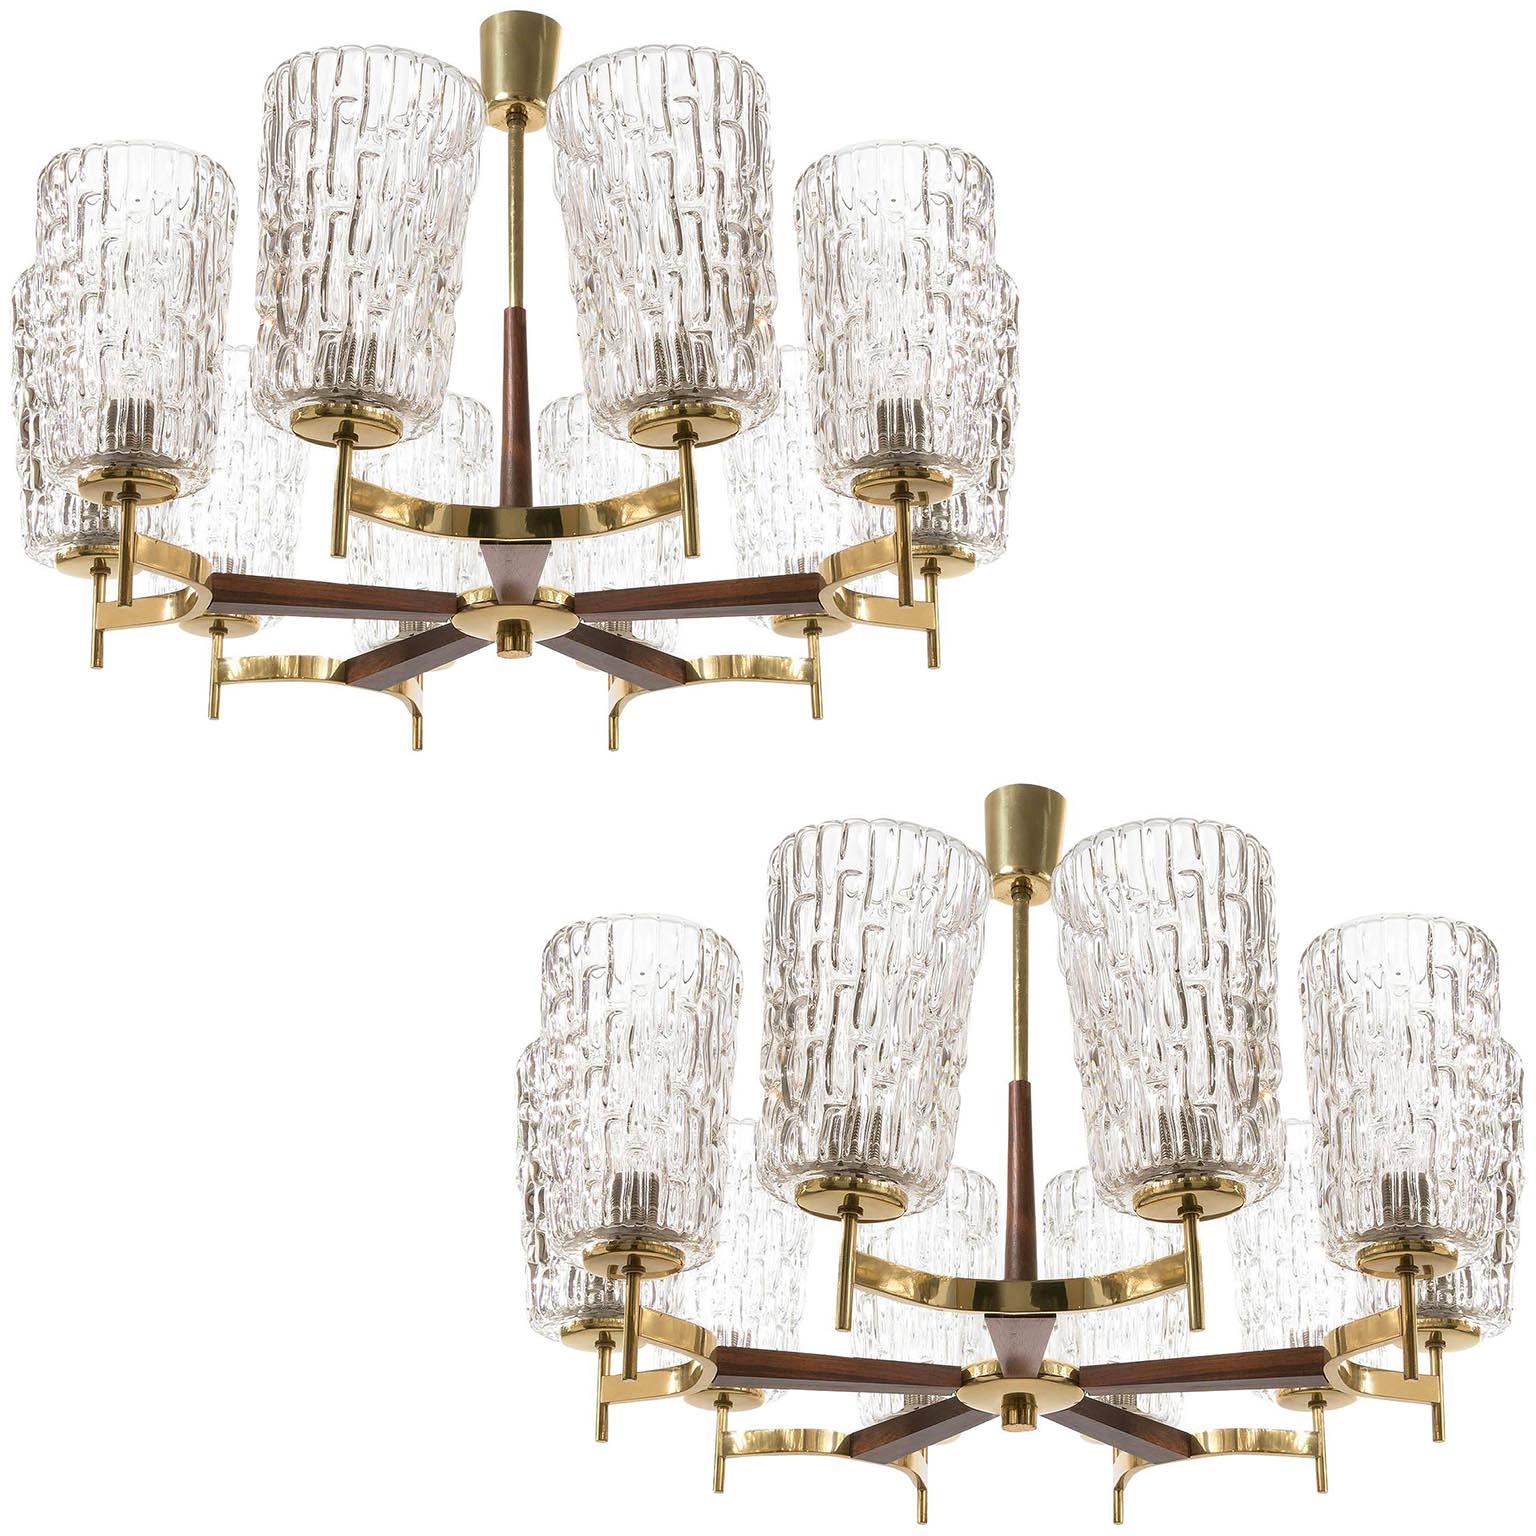 A pair of impressive ten-arm chandeliers by Rupert Nikoll, Vienna, manufacured in Mid-Century, circa 1960 (late 1950s or early 1960s). 
The fixture is made of a nice mixture of materials: large textured clear glass lamp shades, brass and warm walnut